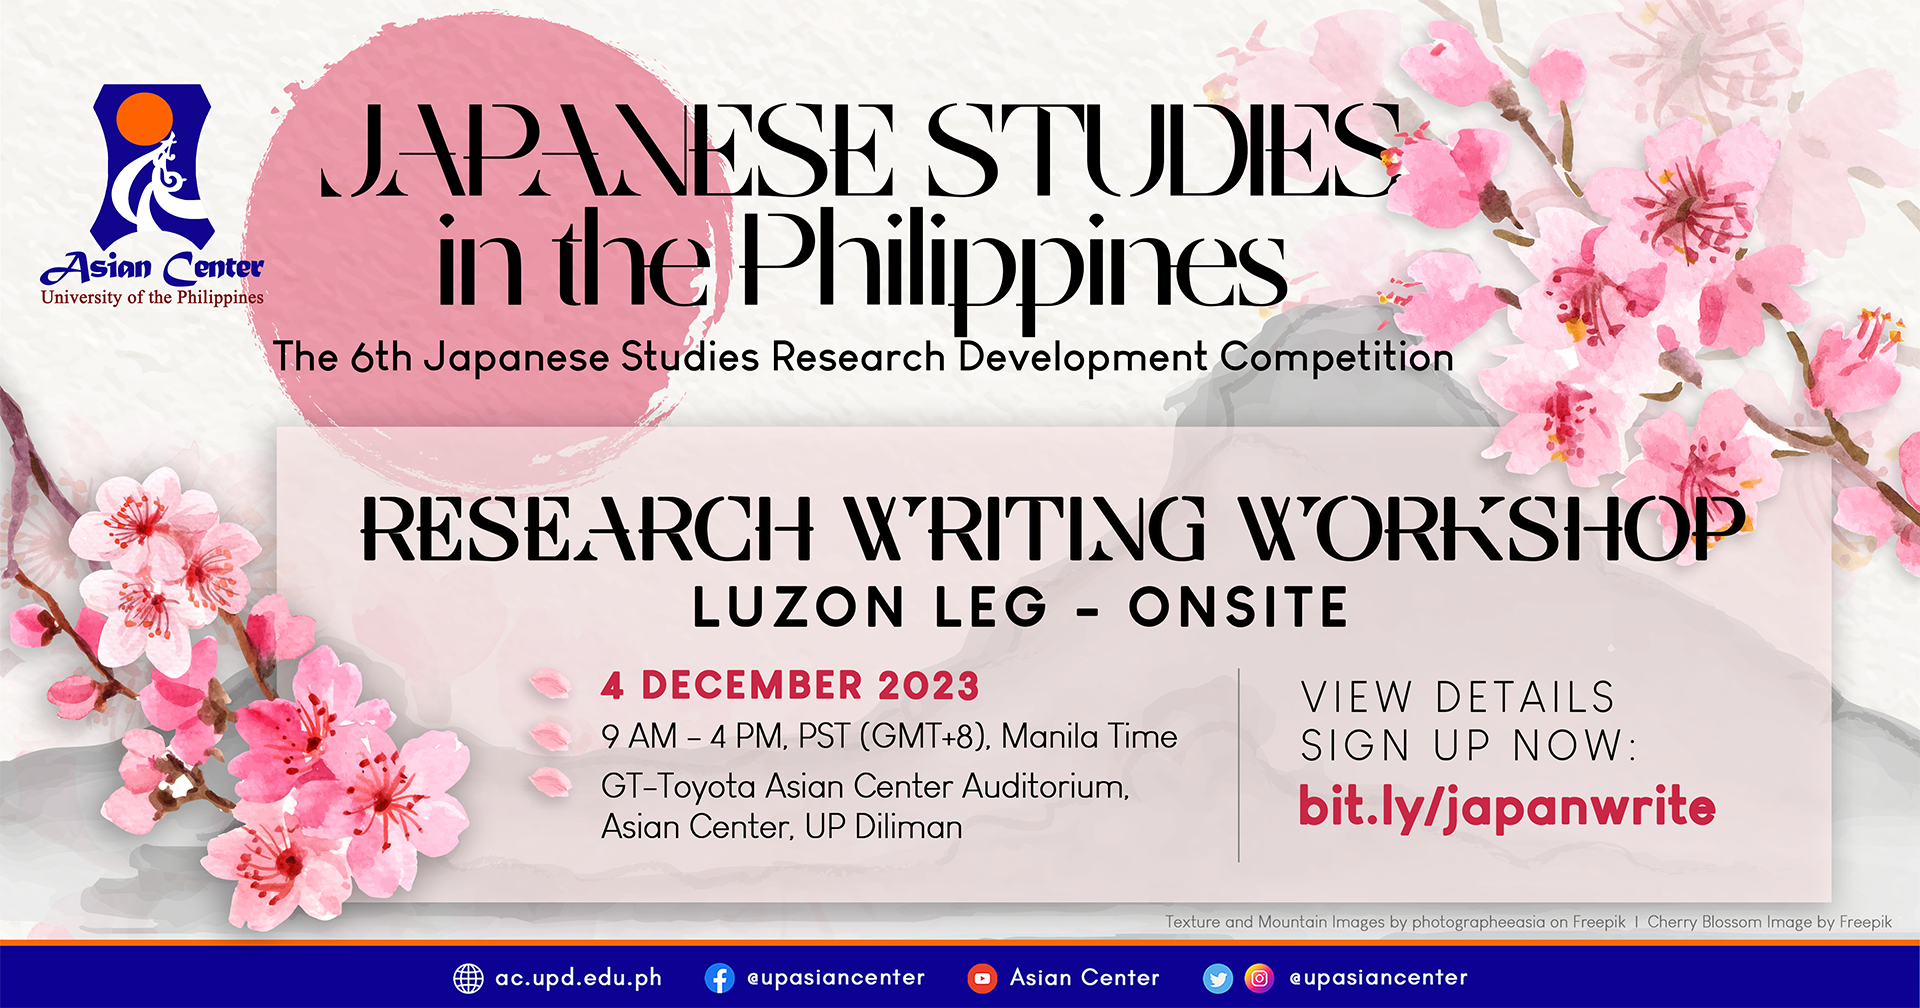 04 December 2023 | Japanese Studies in the Philippines: Research Writing Workshop